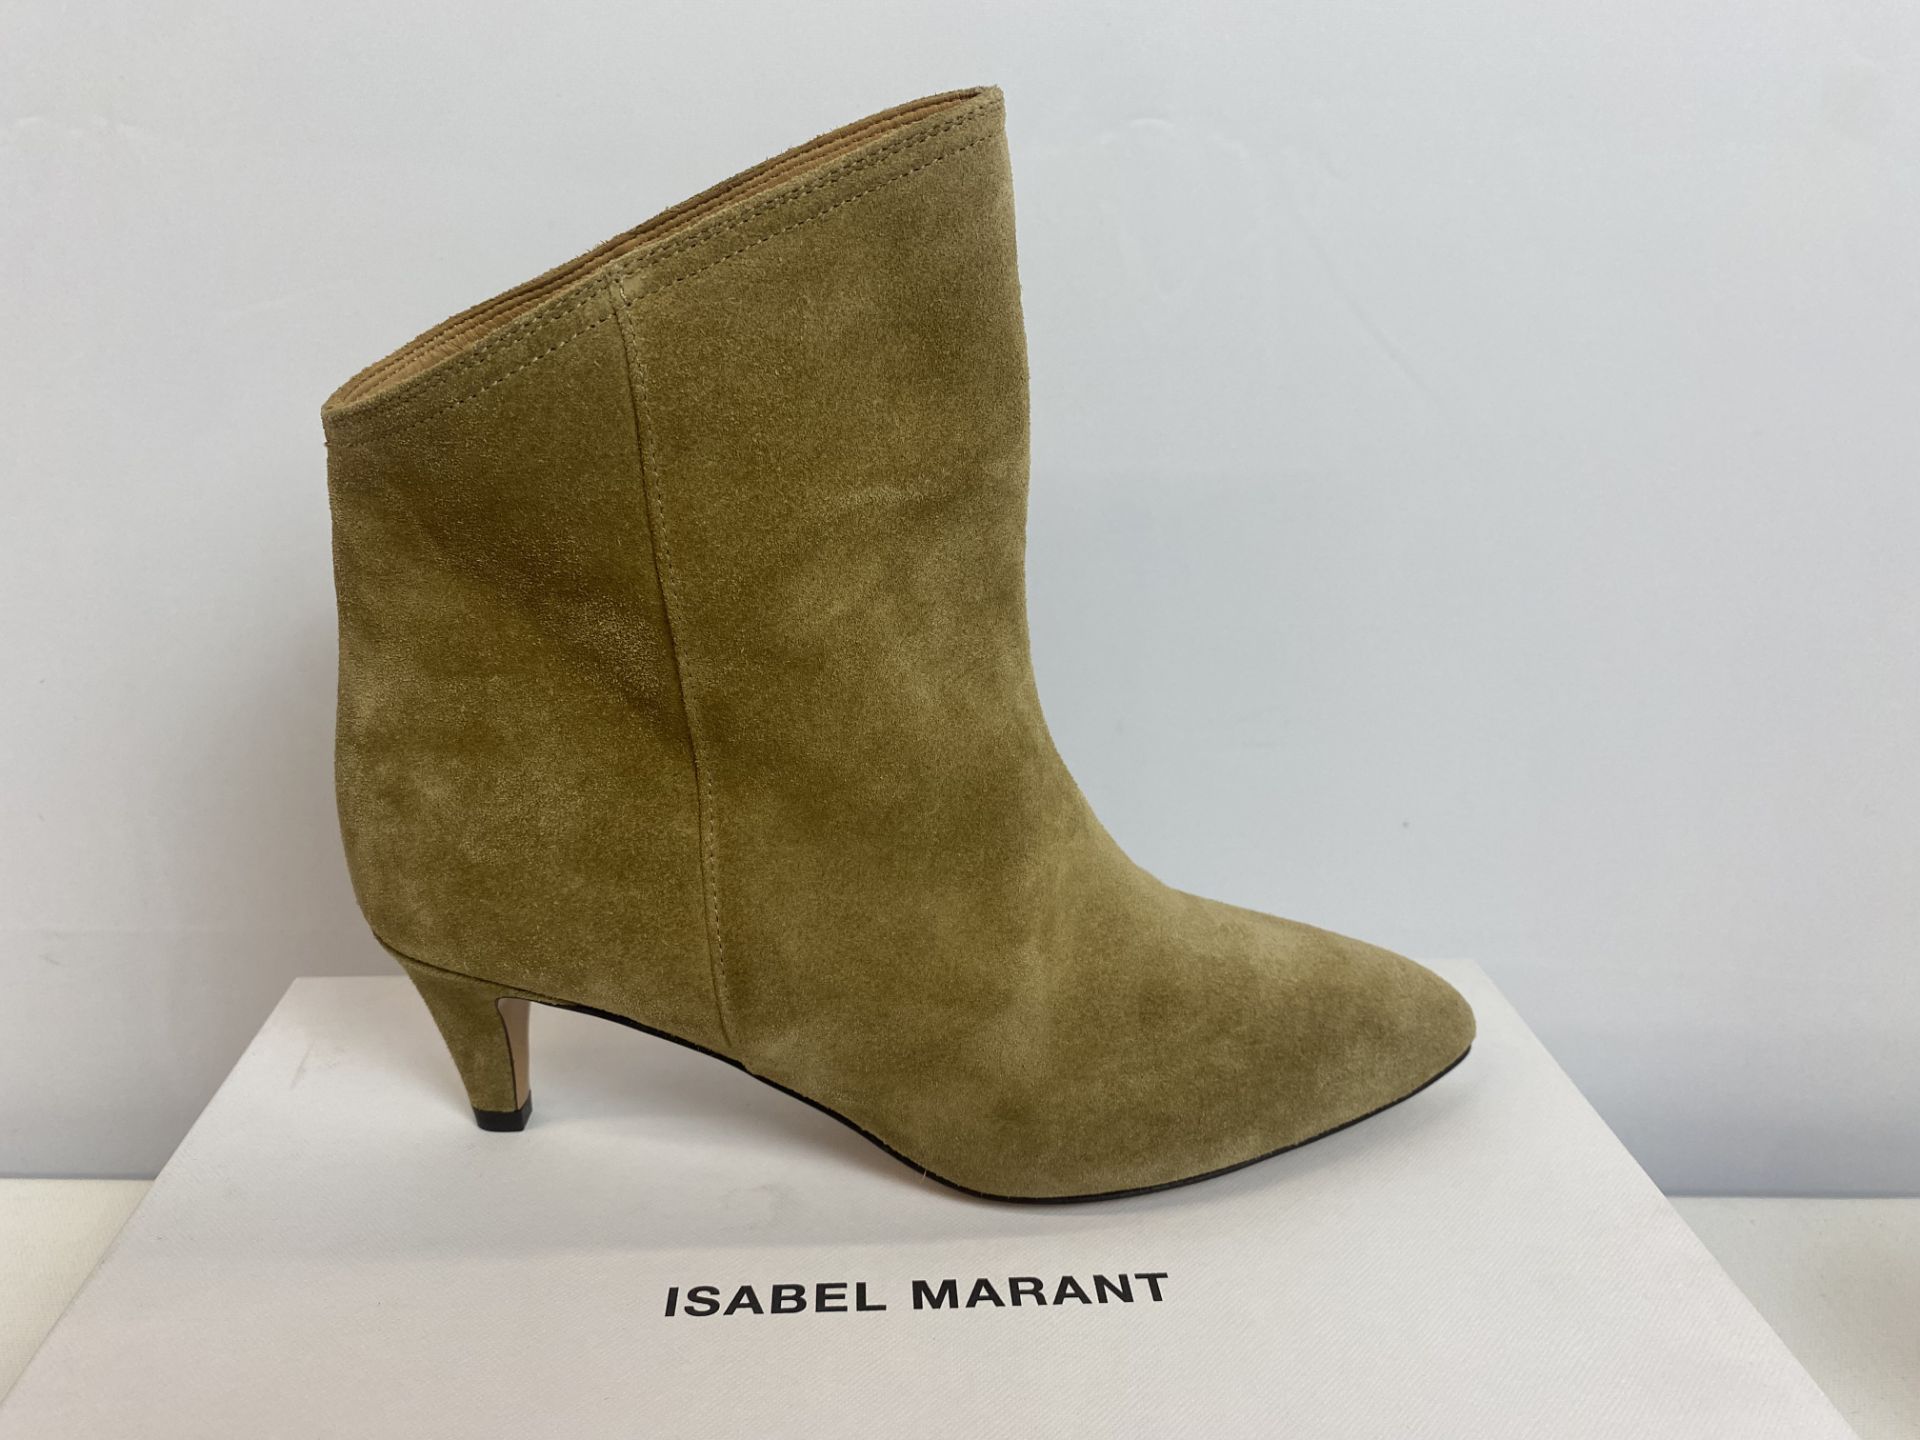 Isabel Marant Bootie dripi ANSUEDE CITY BOOT, Size: 37, Color: BEIGE, Retail Price: $770